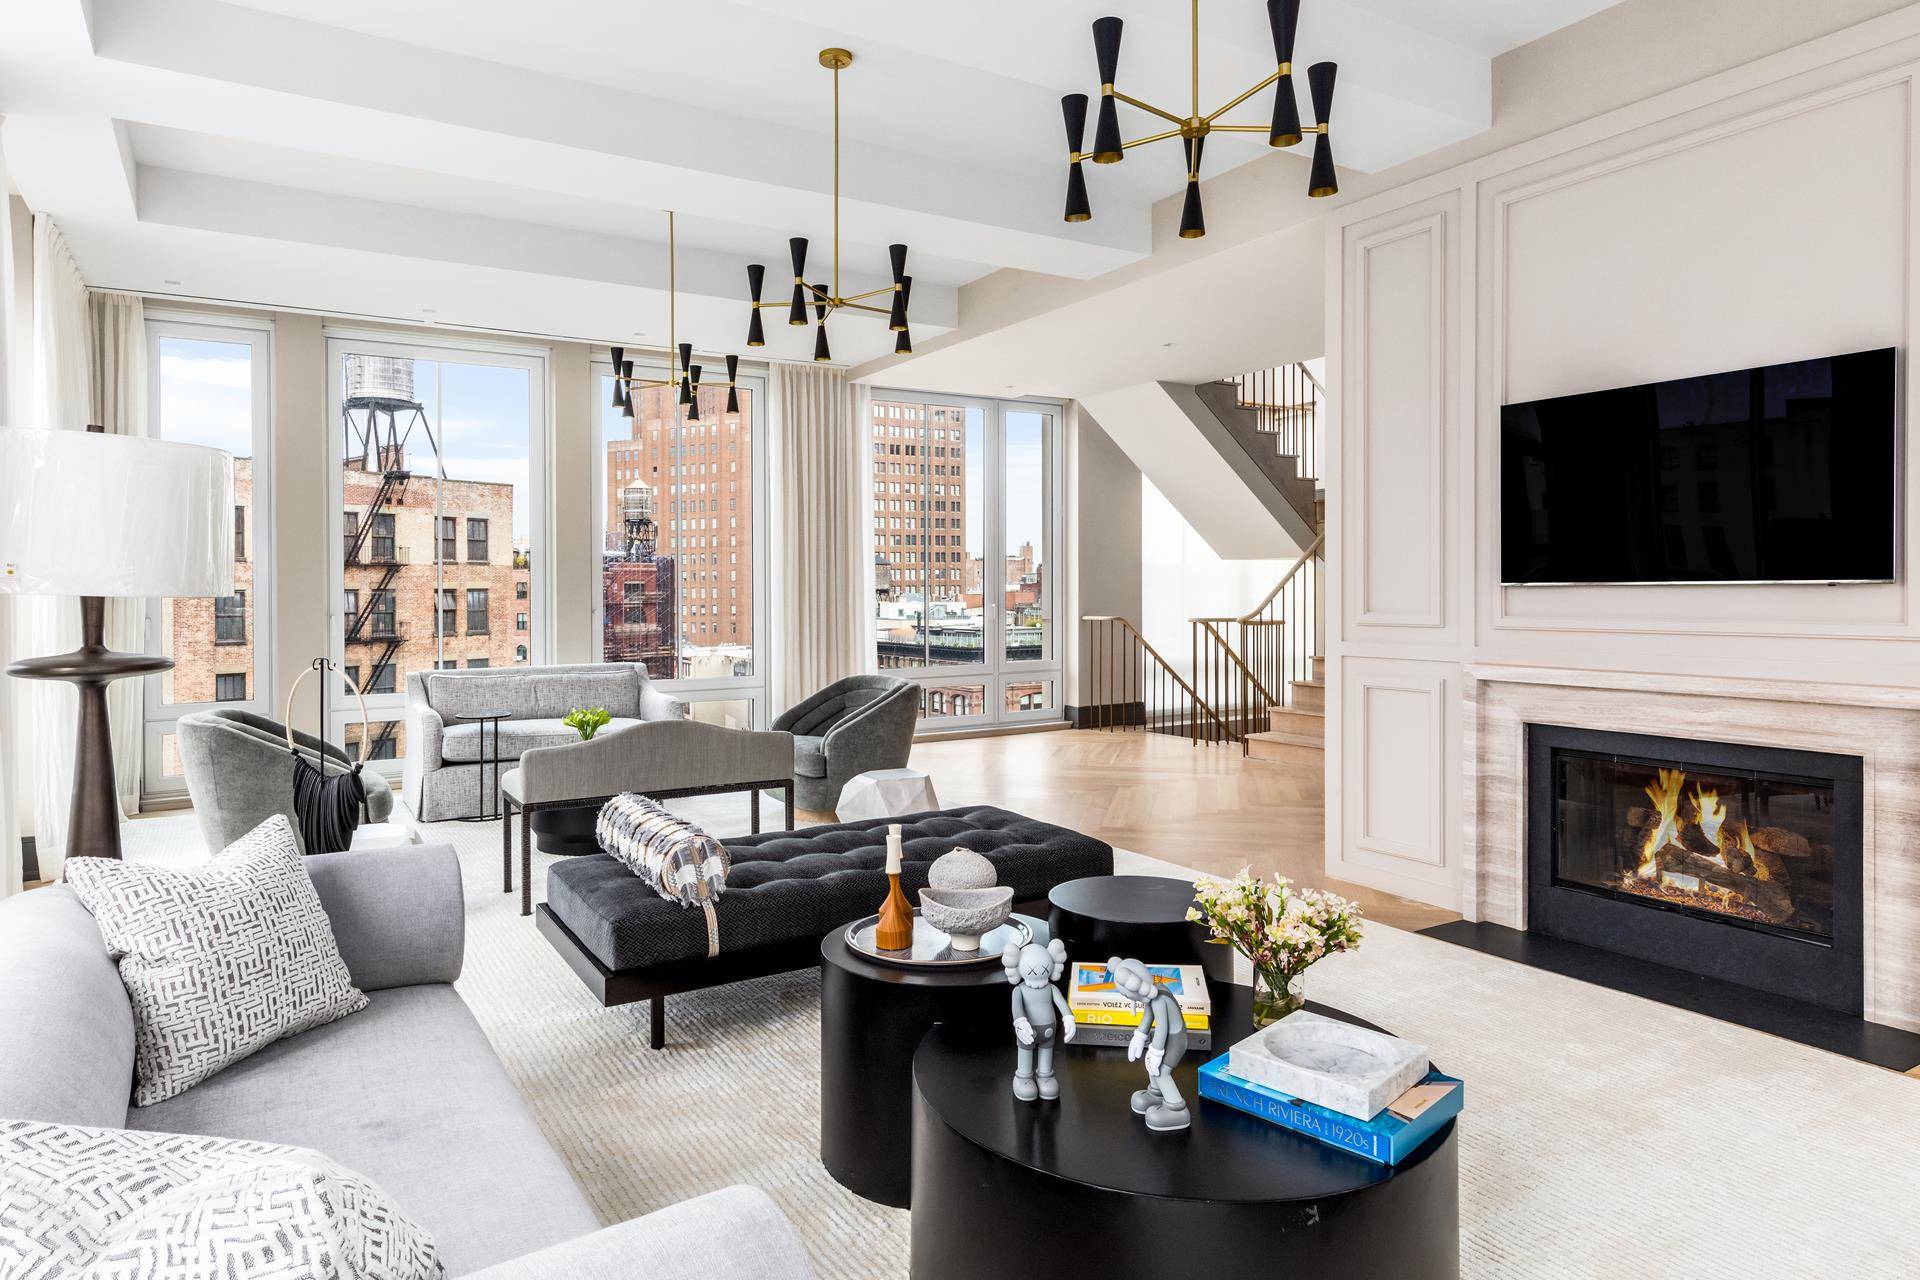 Located on a quiet stretch of road just moments from the finest restaurants, world class shopping, and high end art galleries lining Tribeca's uncrowded streets, this charismatic 7, 261 SF ...